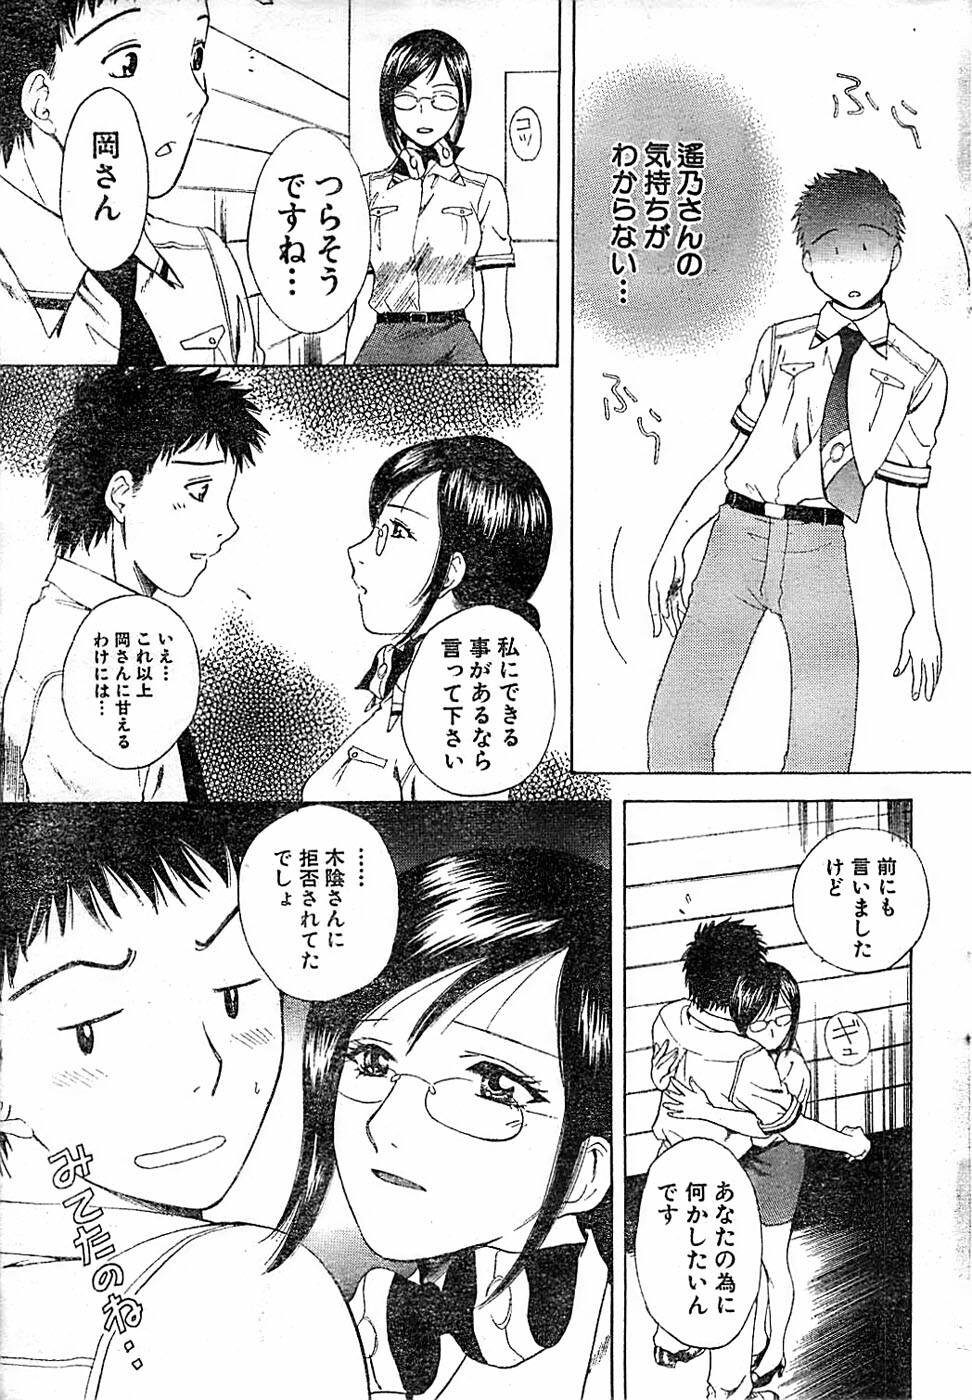 Doki! Special 2006-04 page 25 full